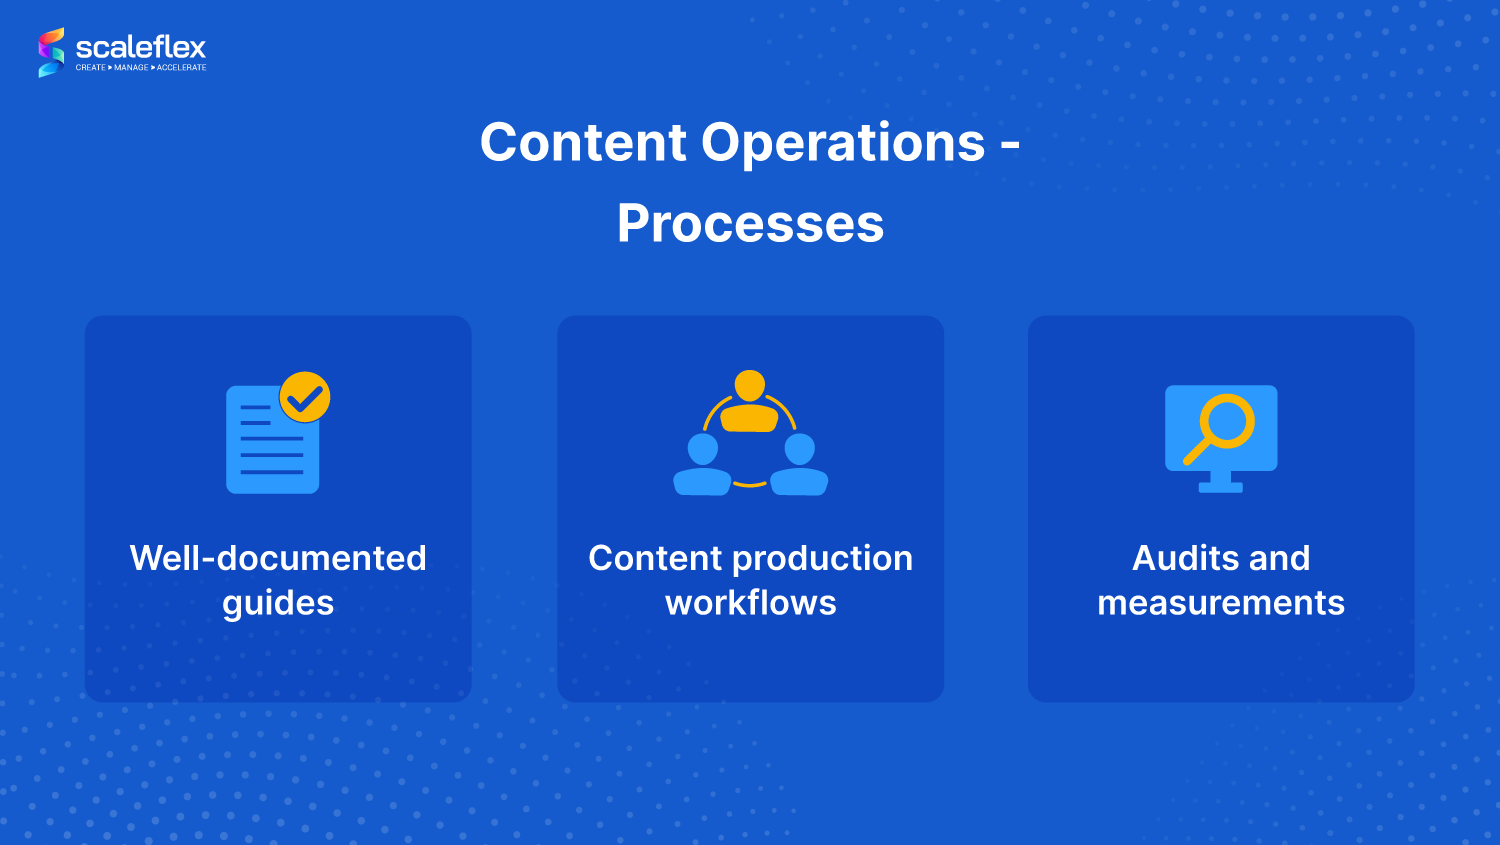 Processes in good content operations